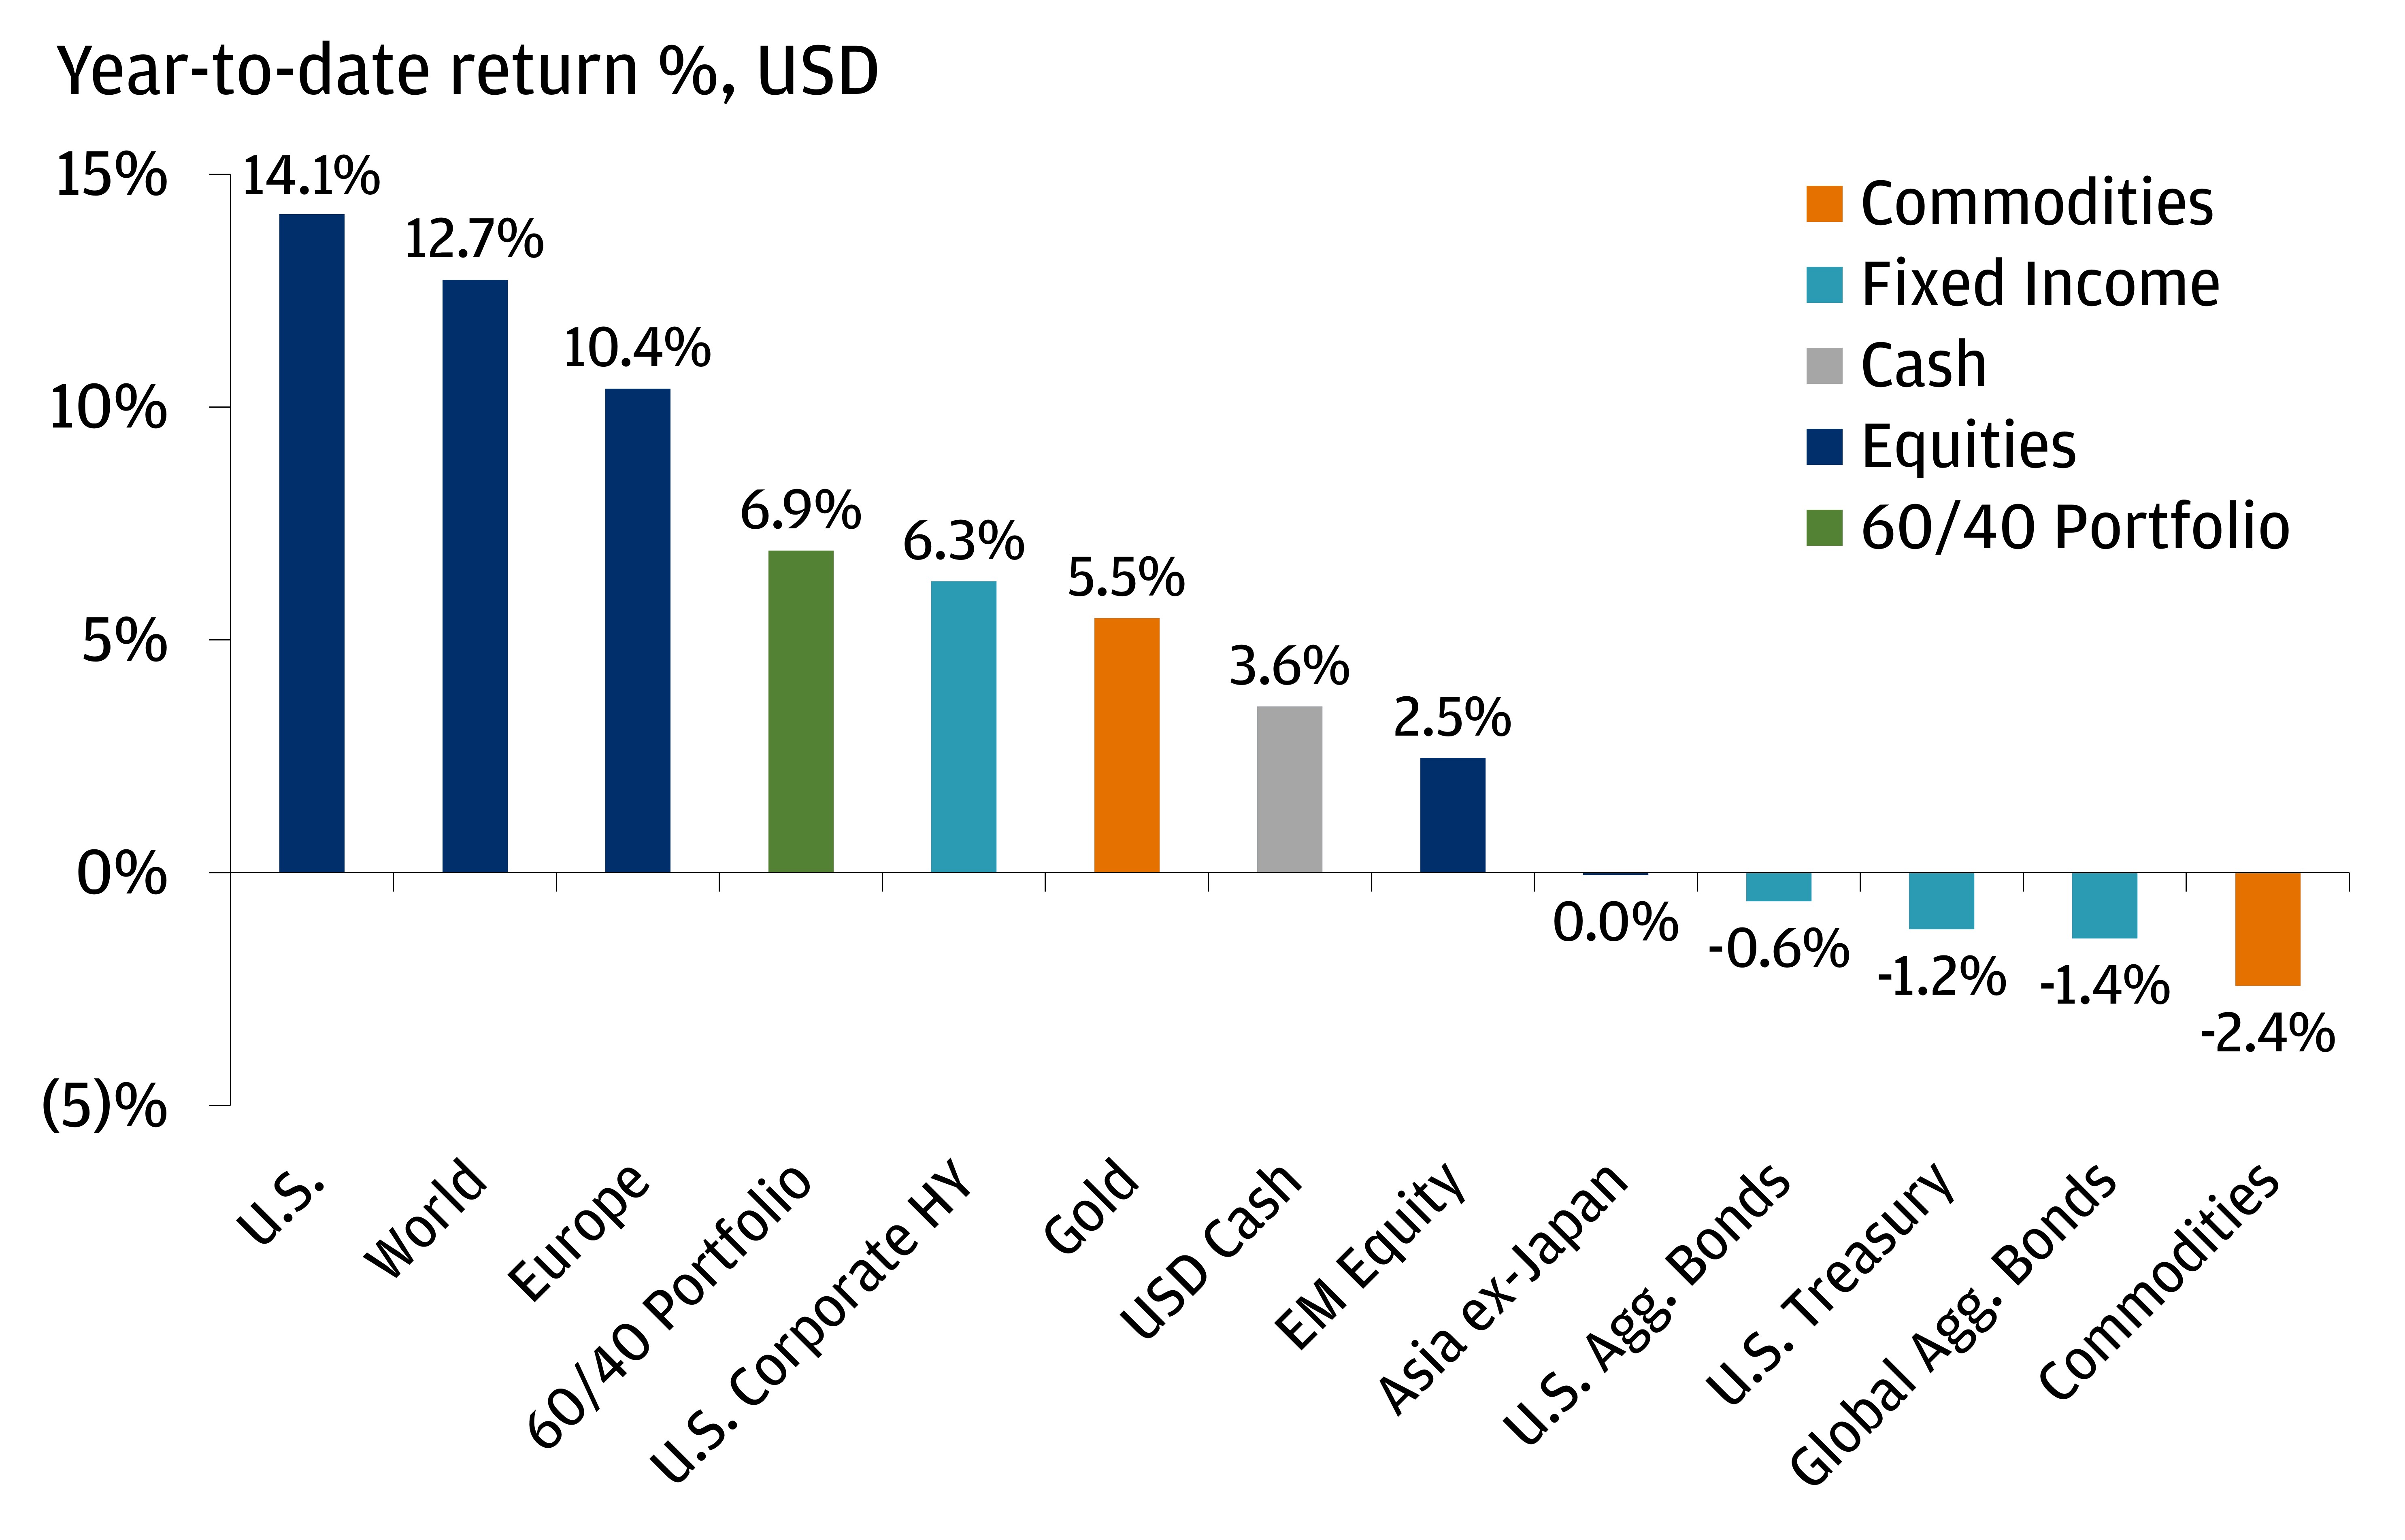 This chart shows the percentage total returns in USD of various categories.